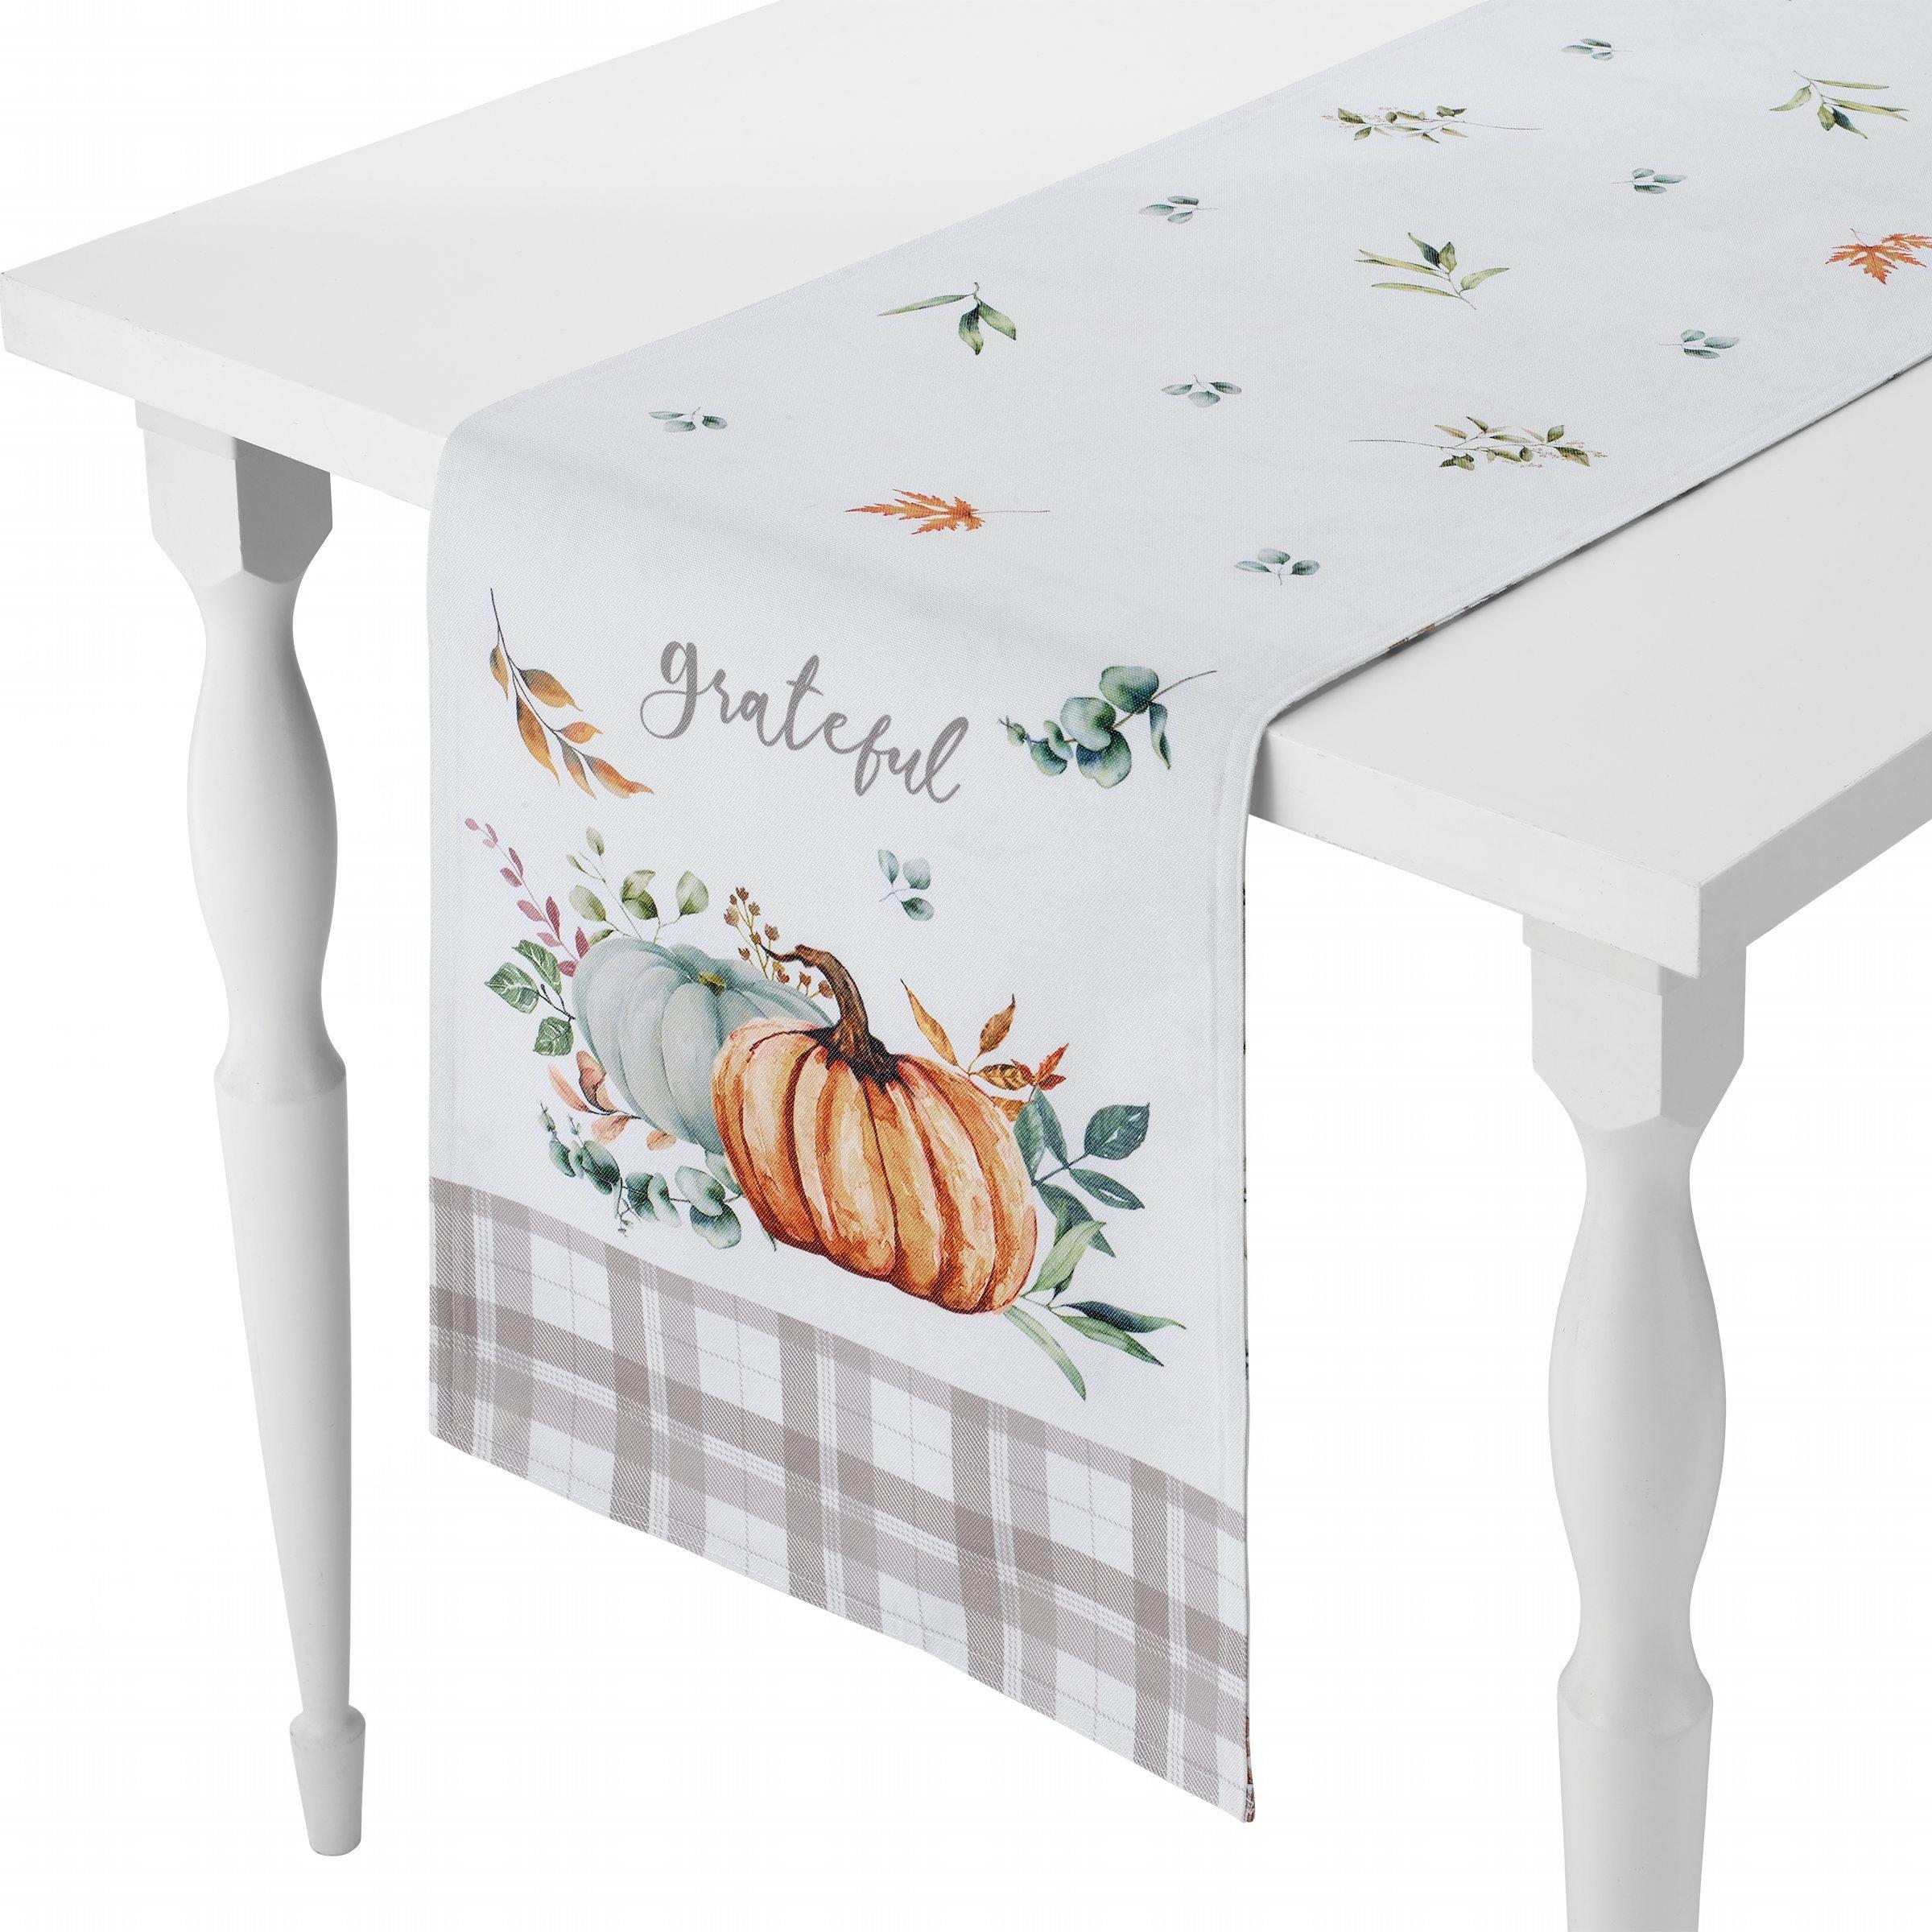 Grateful Patch 14 x 72 Table Runner